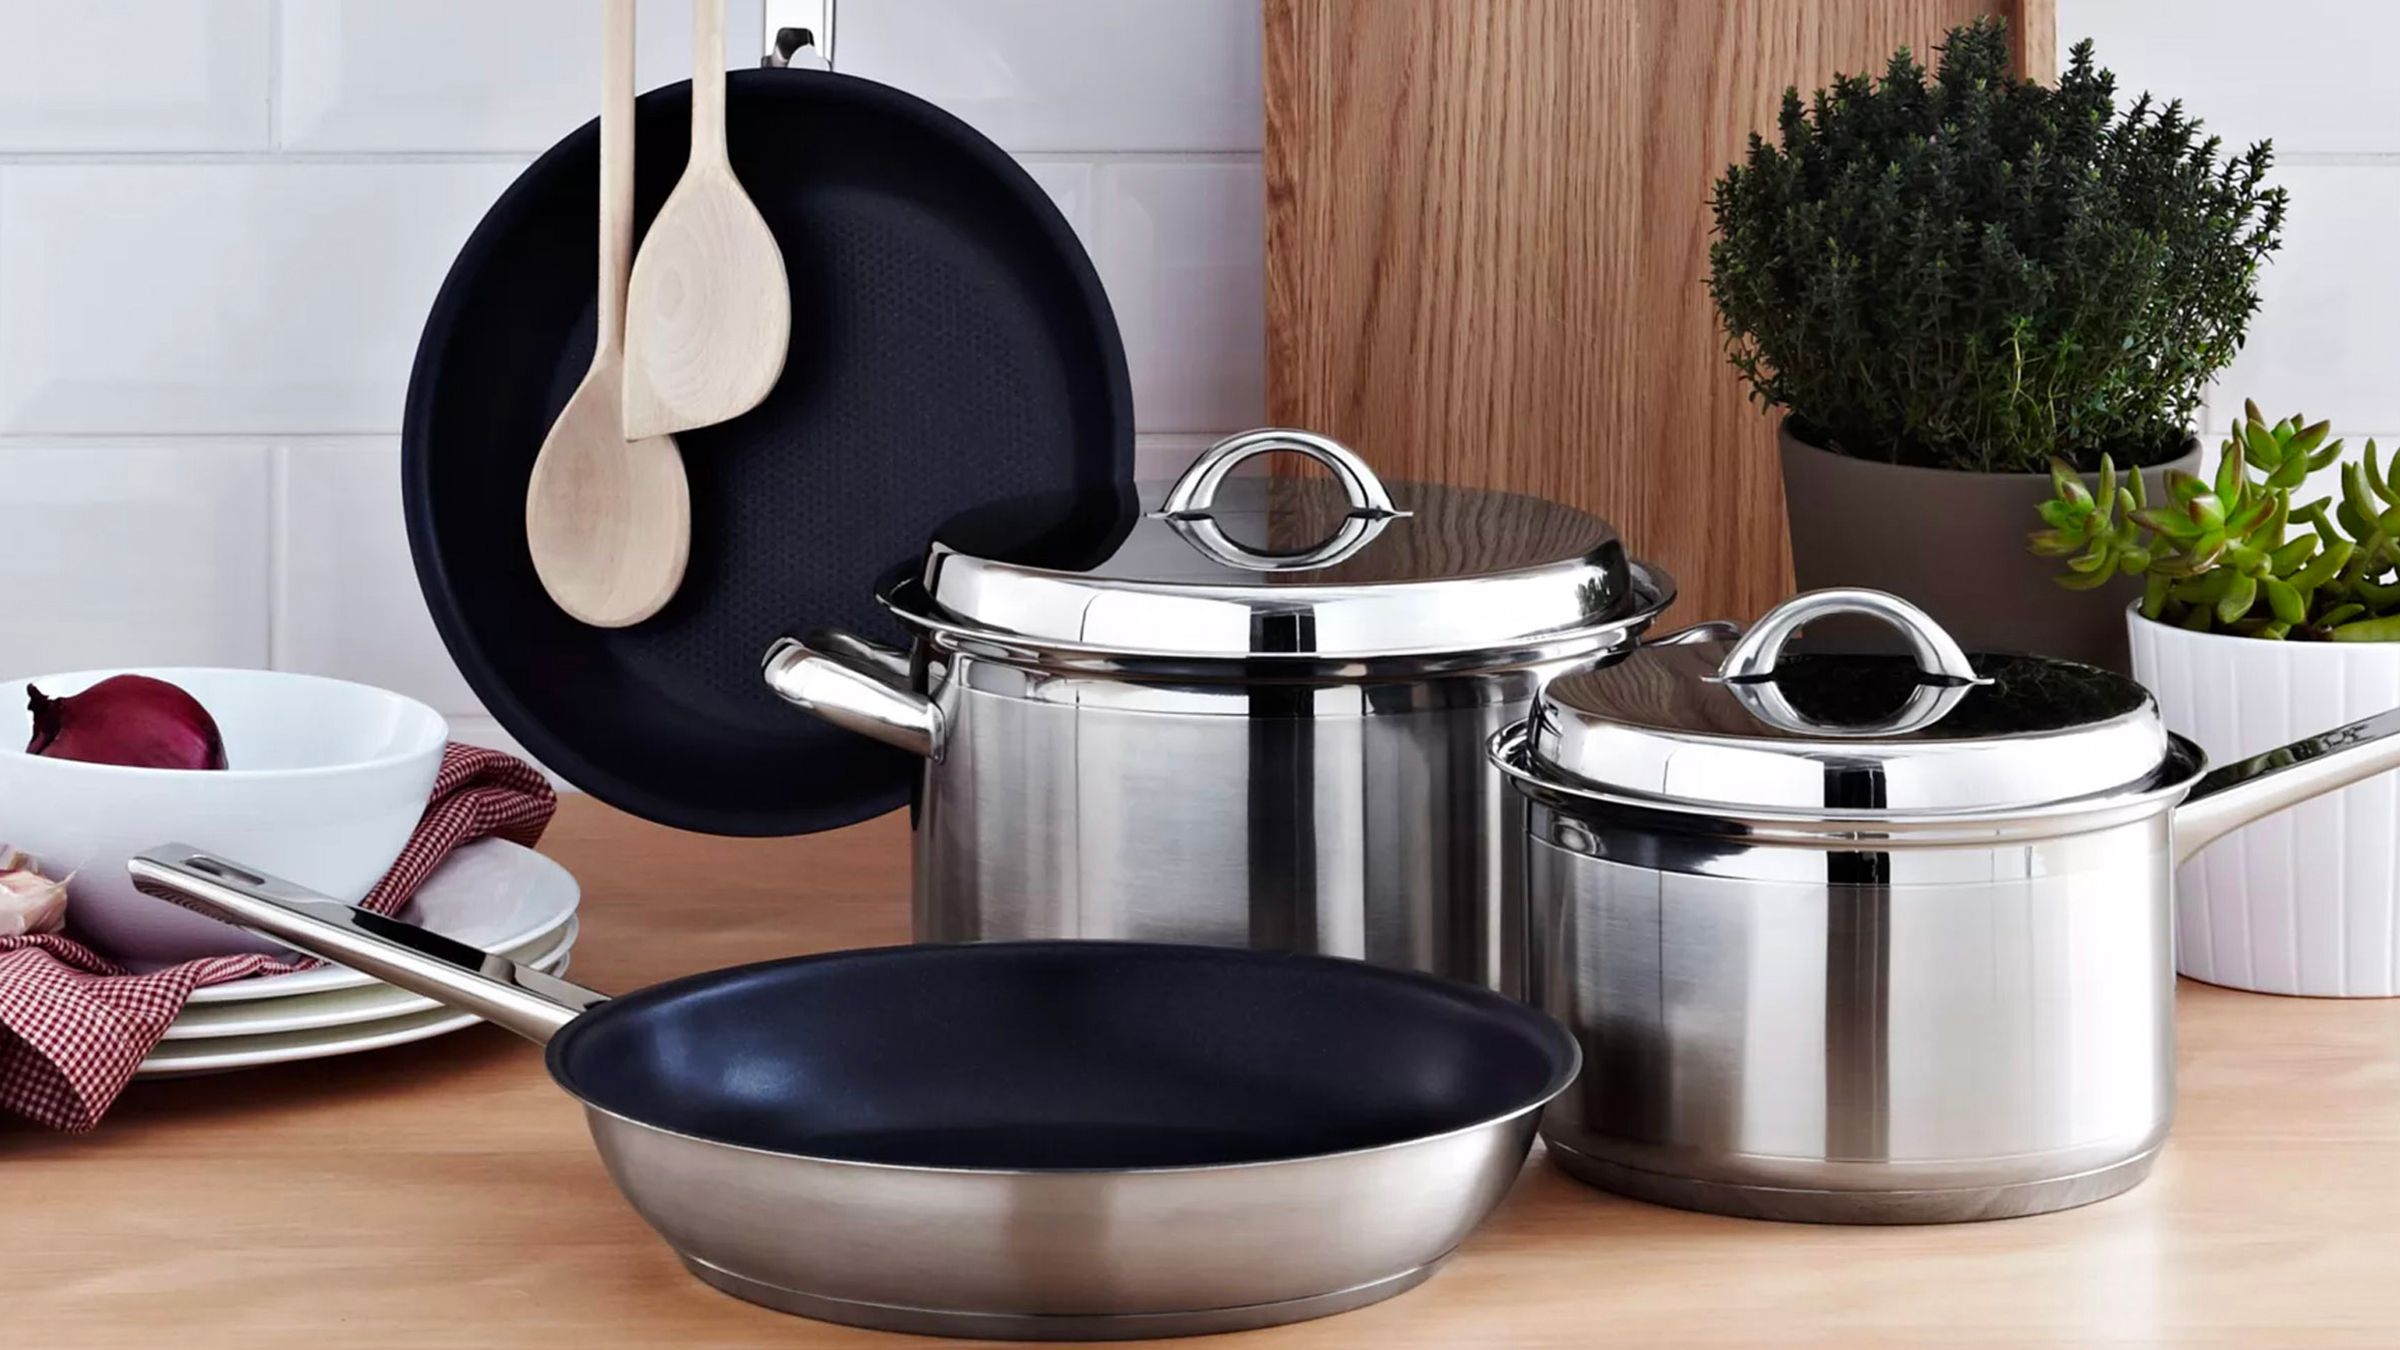 Le Creuset baking products